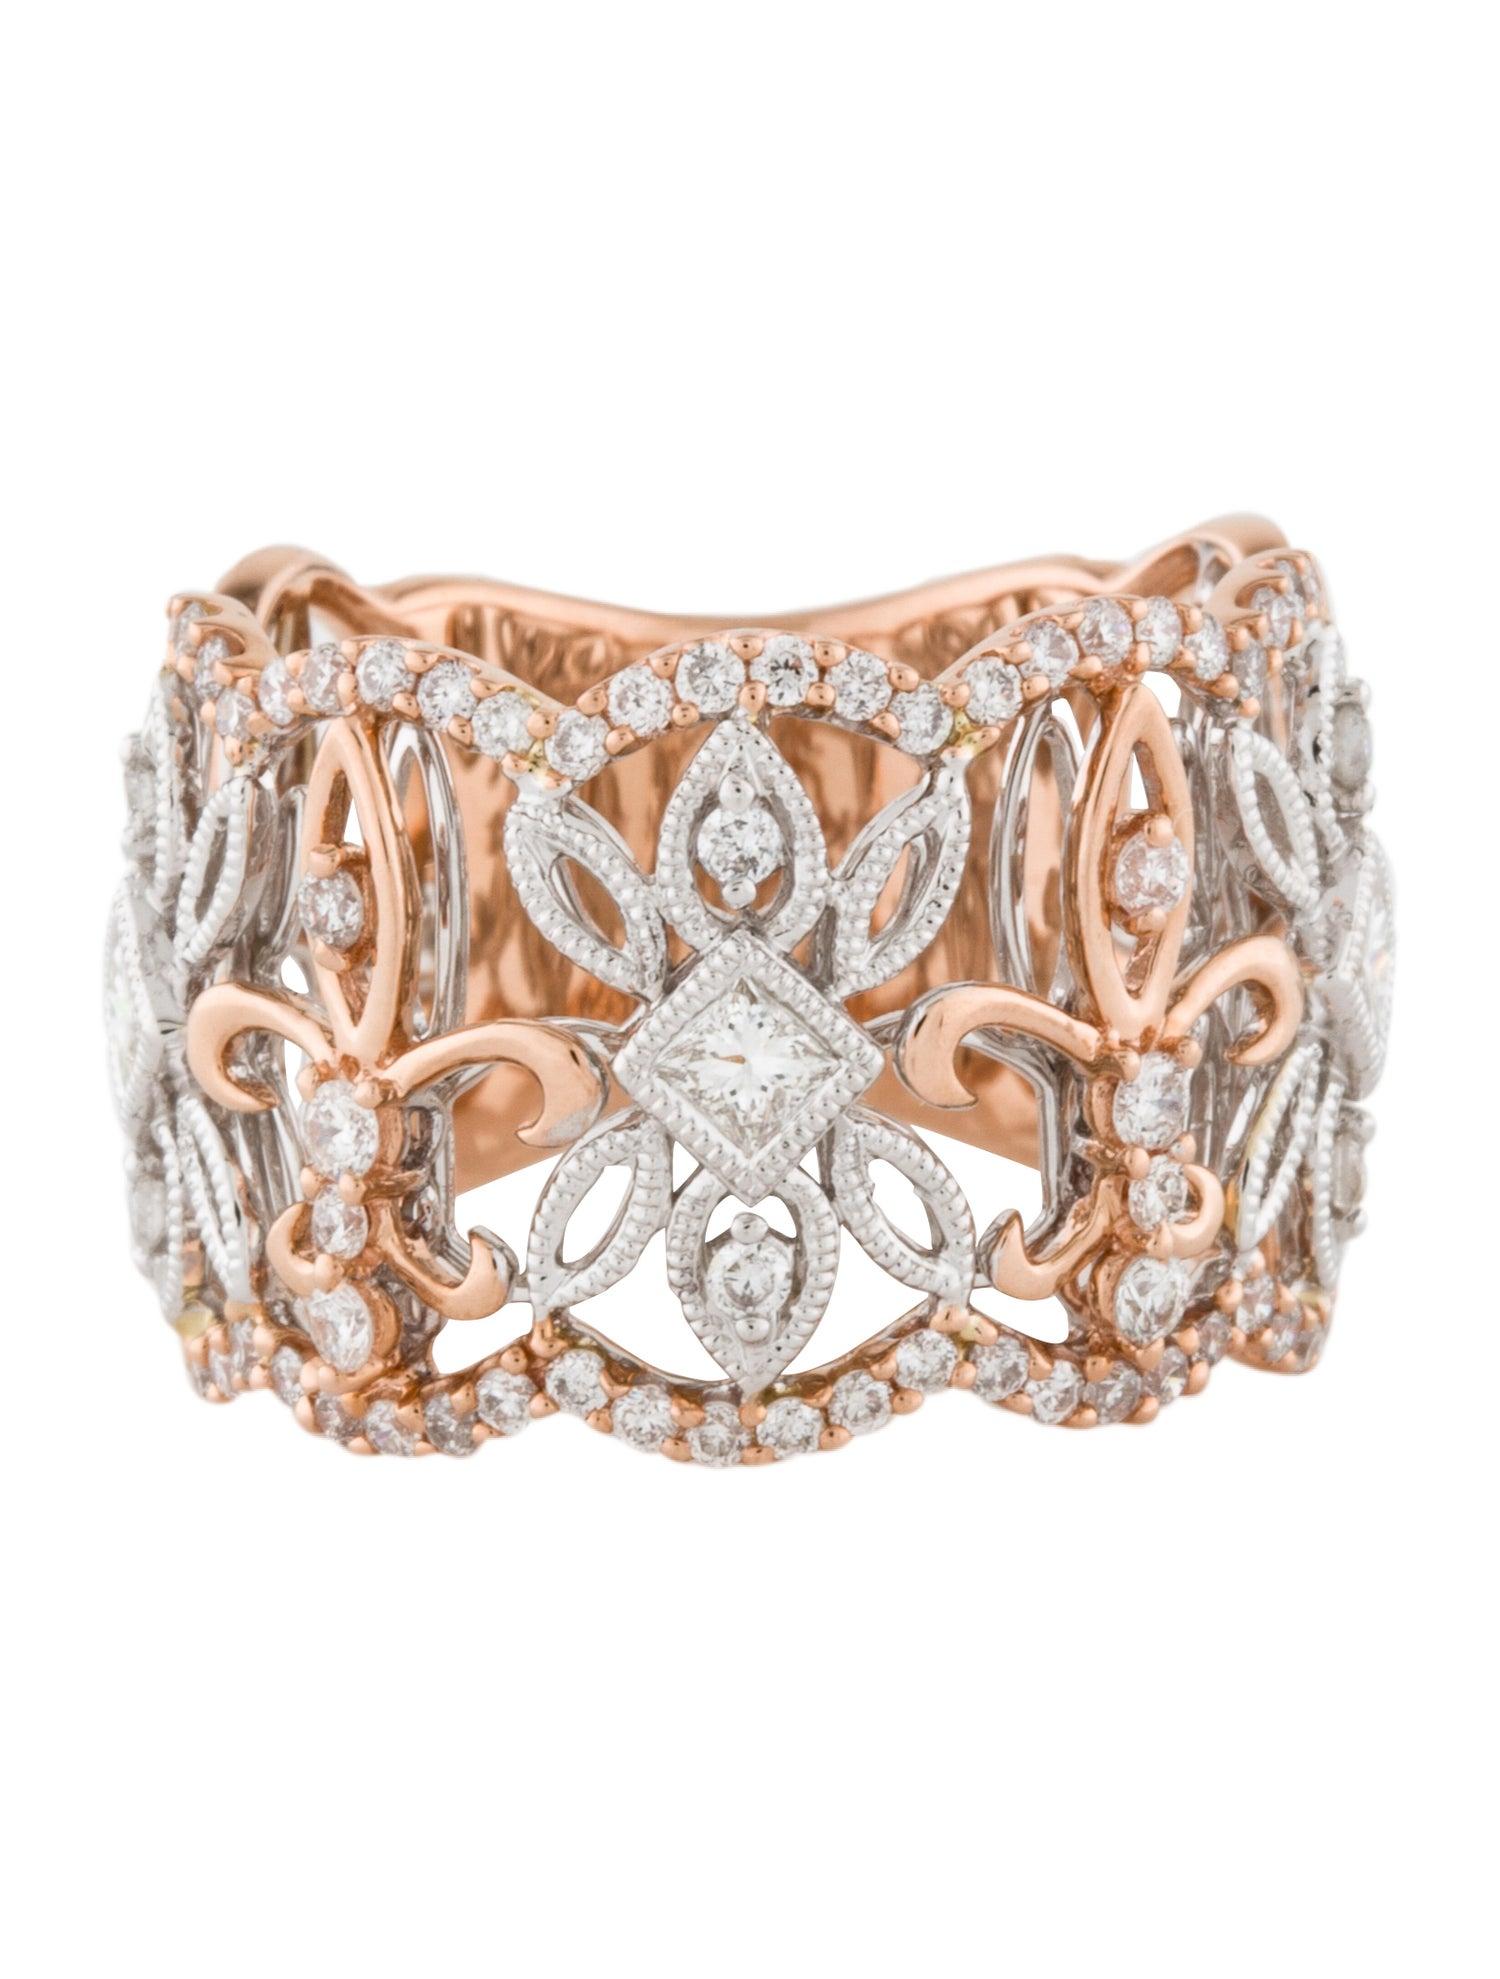 A beautiful 14Kt rose and white gold diamond band featuring 0.46 carats of round brilliant cut diamonds and 0.34 carats of princess cut diamonds. There is a fleur-de-lis motif adorning the band. There are 3 princess cut diamonds and 64 round